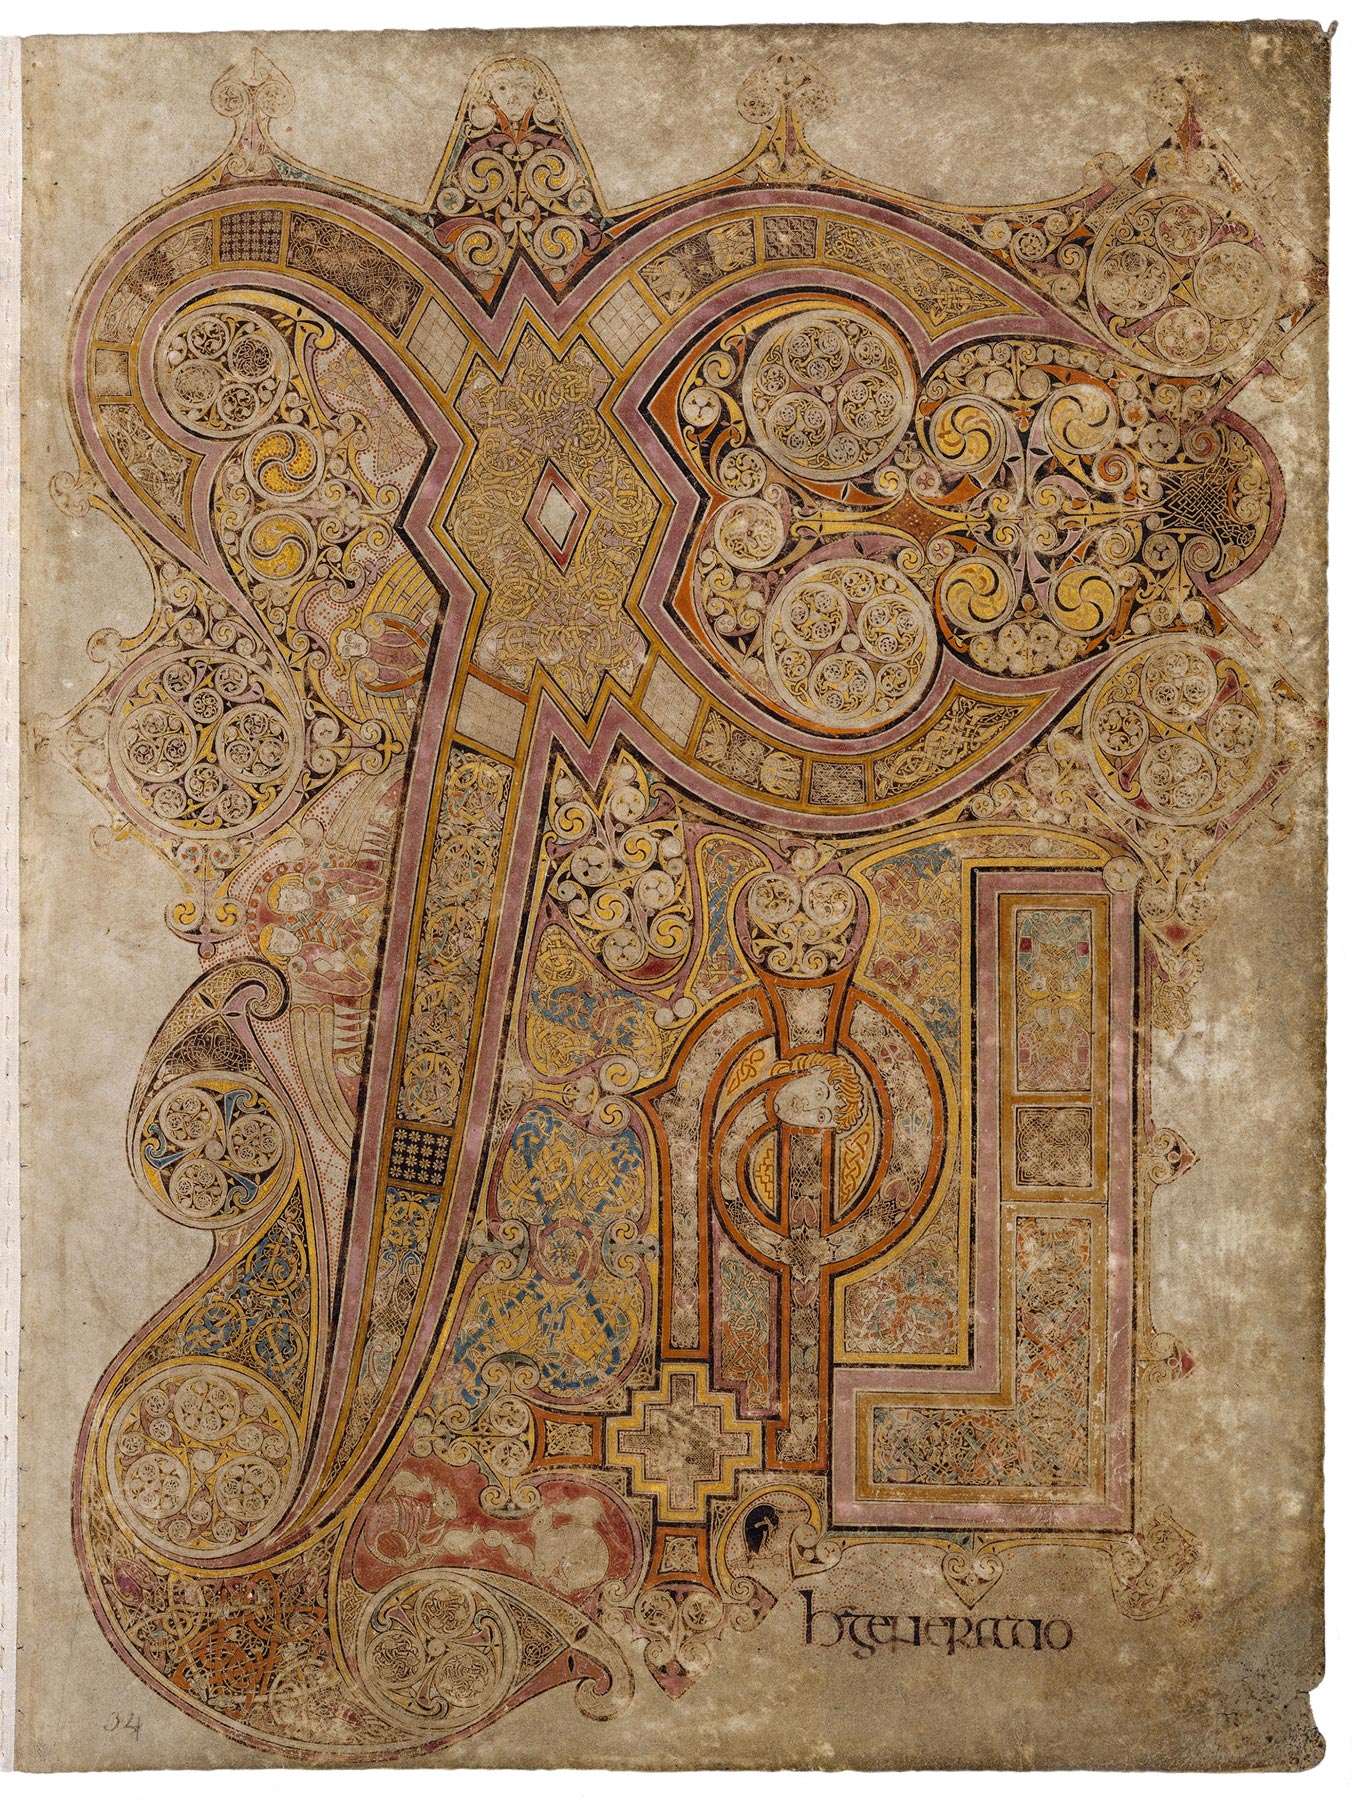 Chi Rho page, folio 34 of the the Book of Kells, Iona, Scotland, or County Meath, Ireland, c. 800